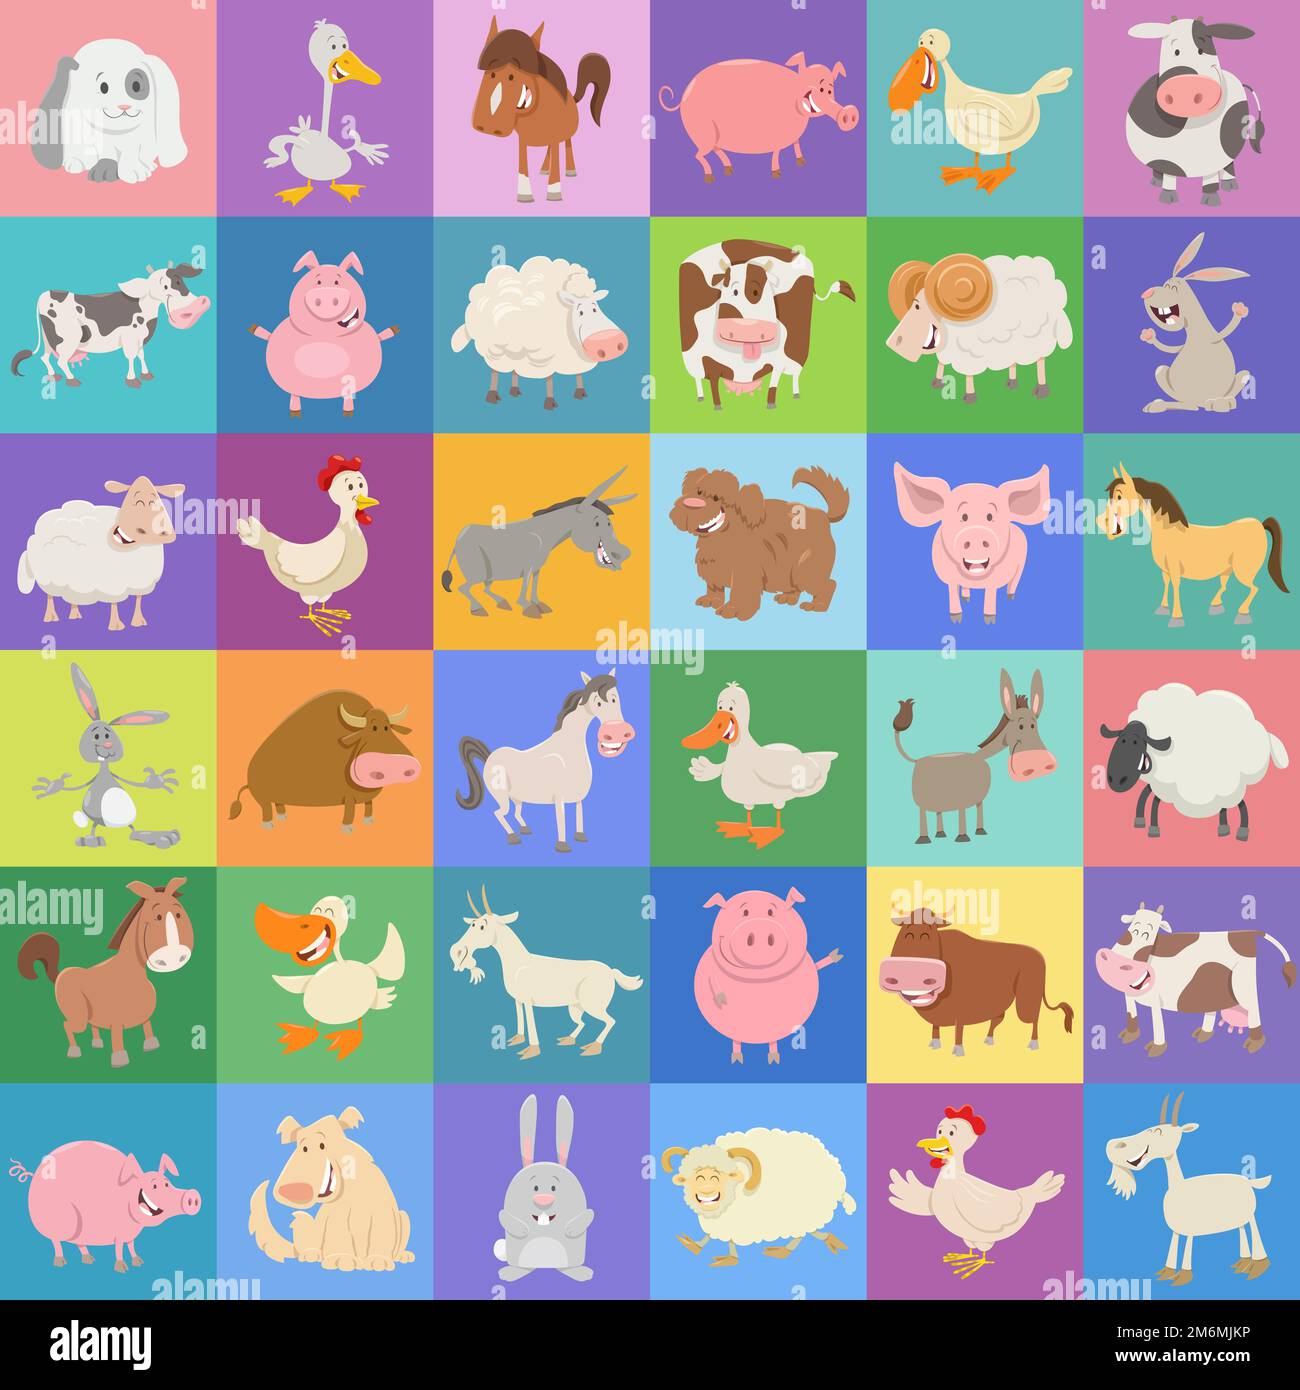 Background design with funny cartoon farm animal characters Stock Photo